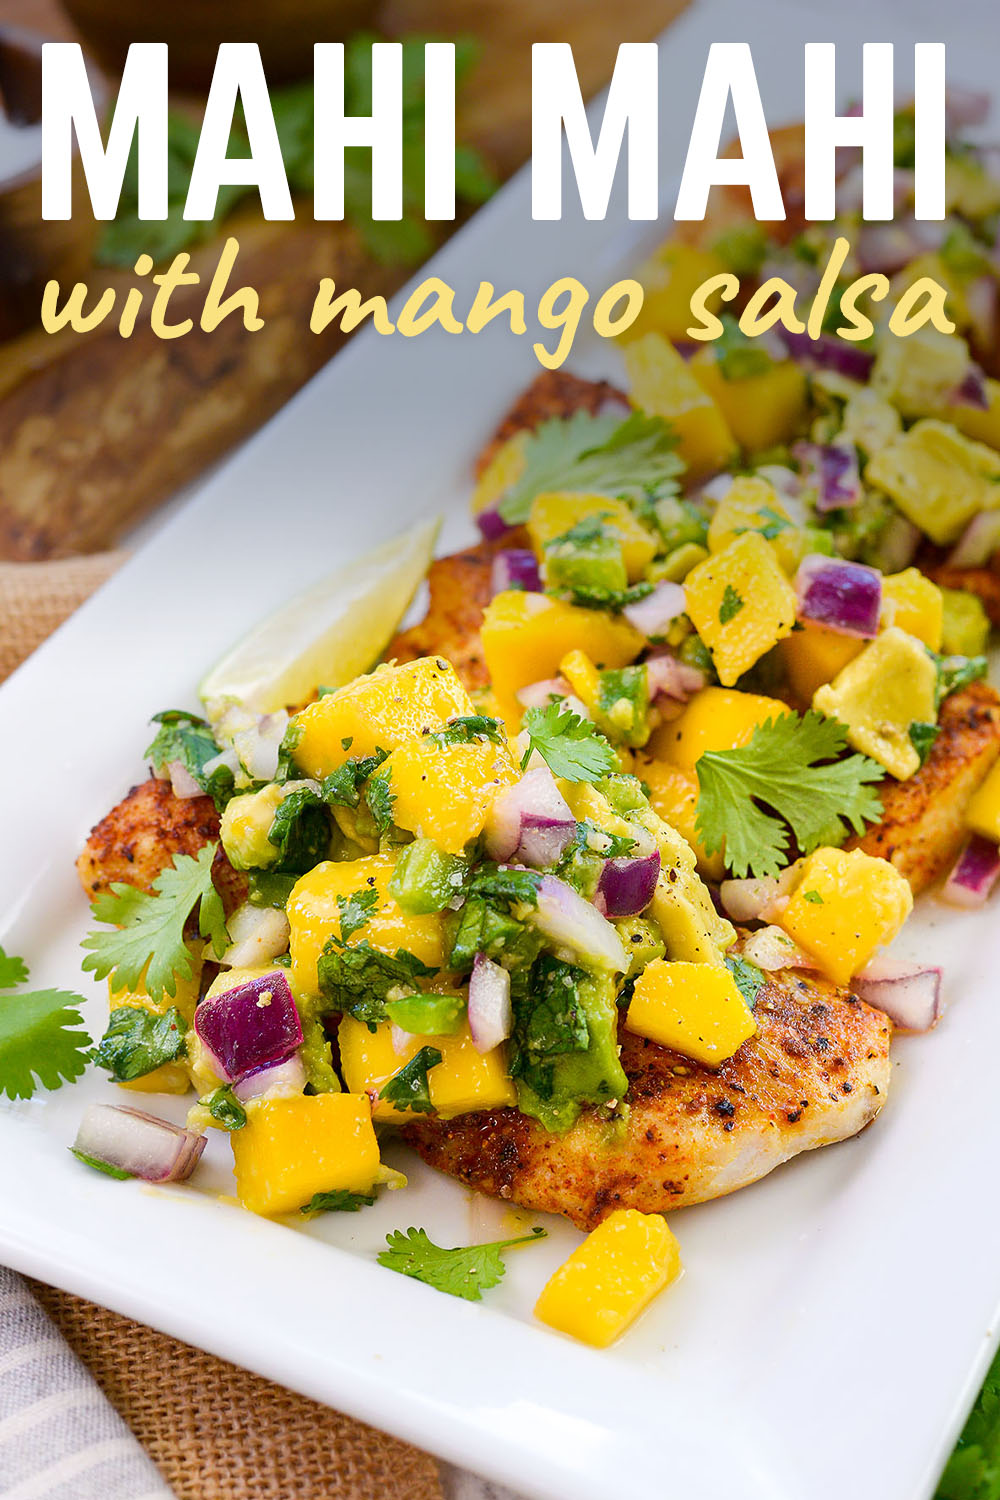 This unique air fryer dish cooks a wonderful mahi mahi filet.  While that is cooking we whip up some mango avocado salsa to go with it and in no time we have a great, filling meal!